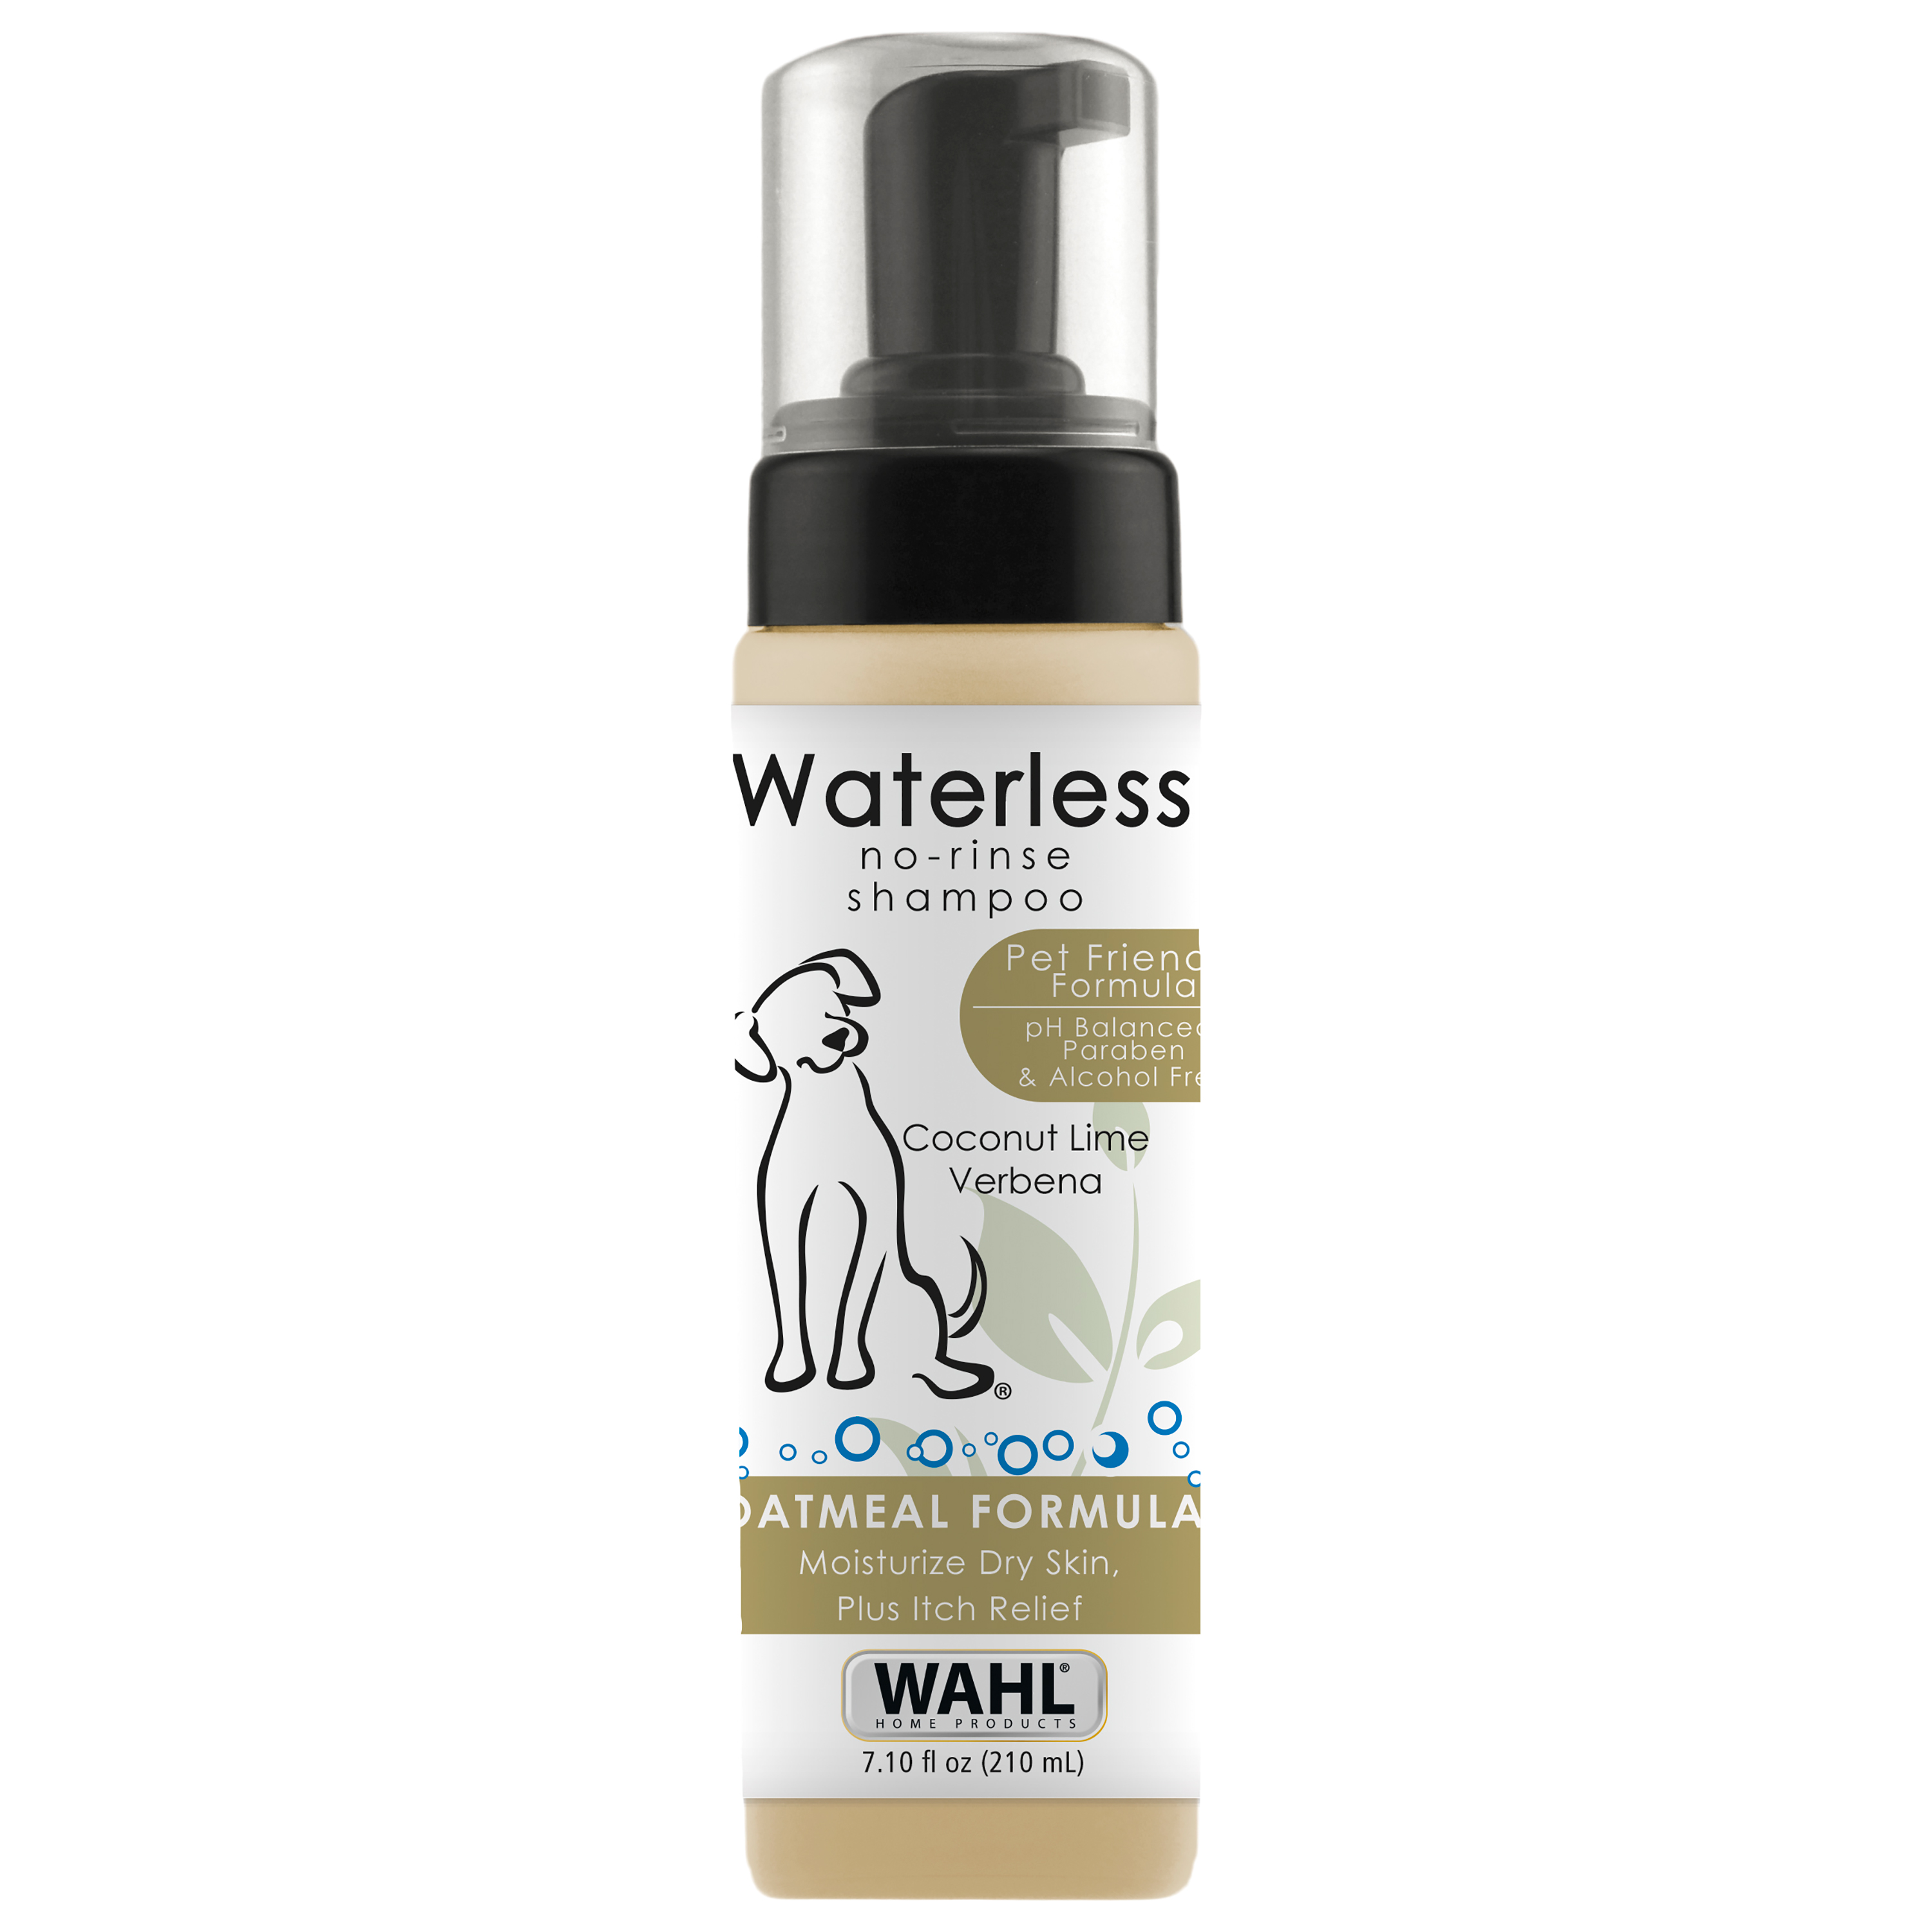 Wahl Waterless No Rinse Coconut Lime Verbena Dog shampoo, 7.1-oz bottle 820015A - image 1 of 9